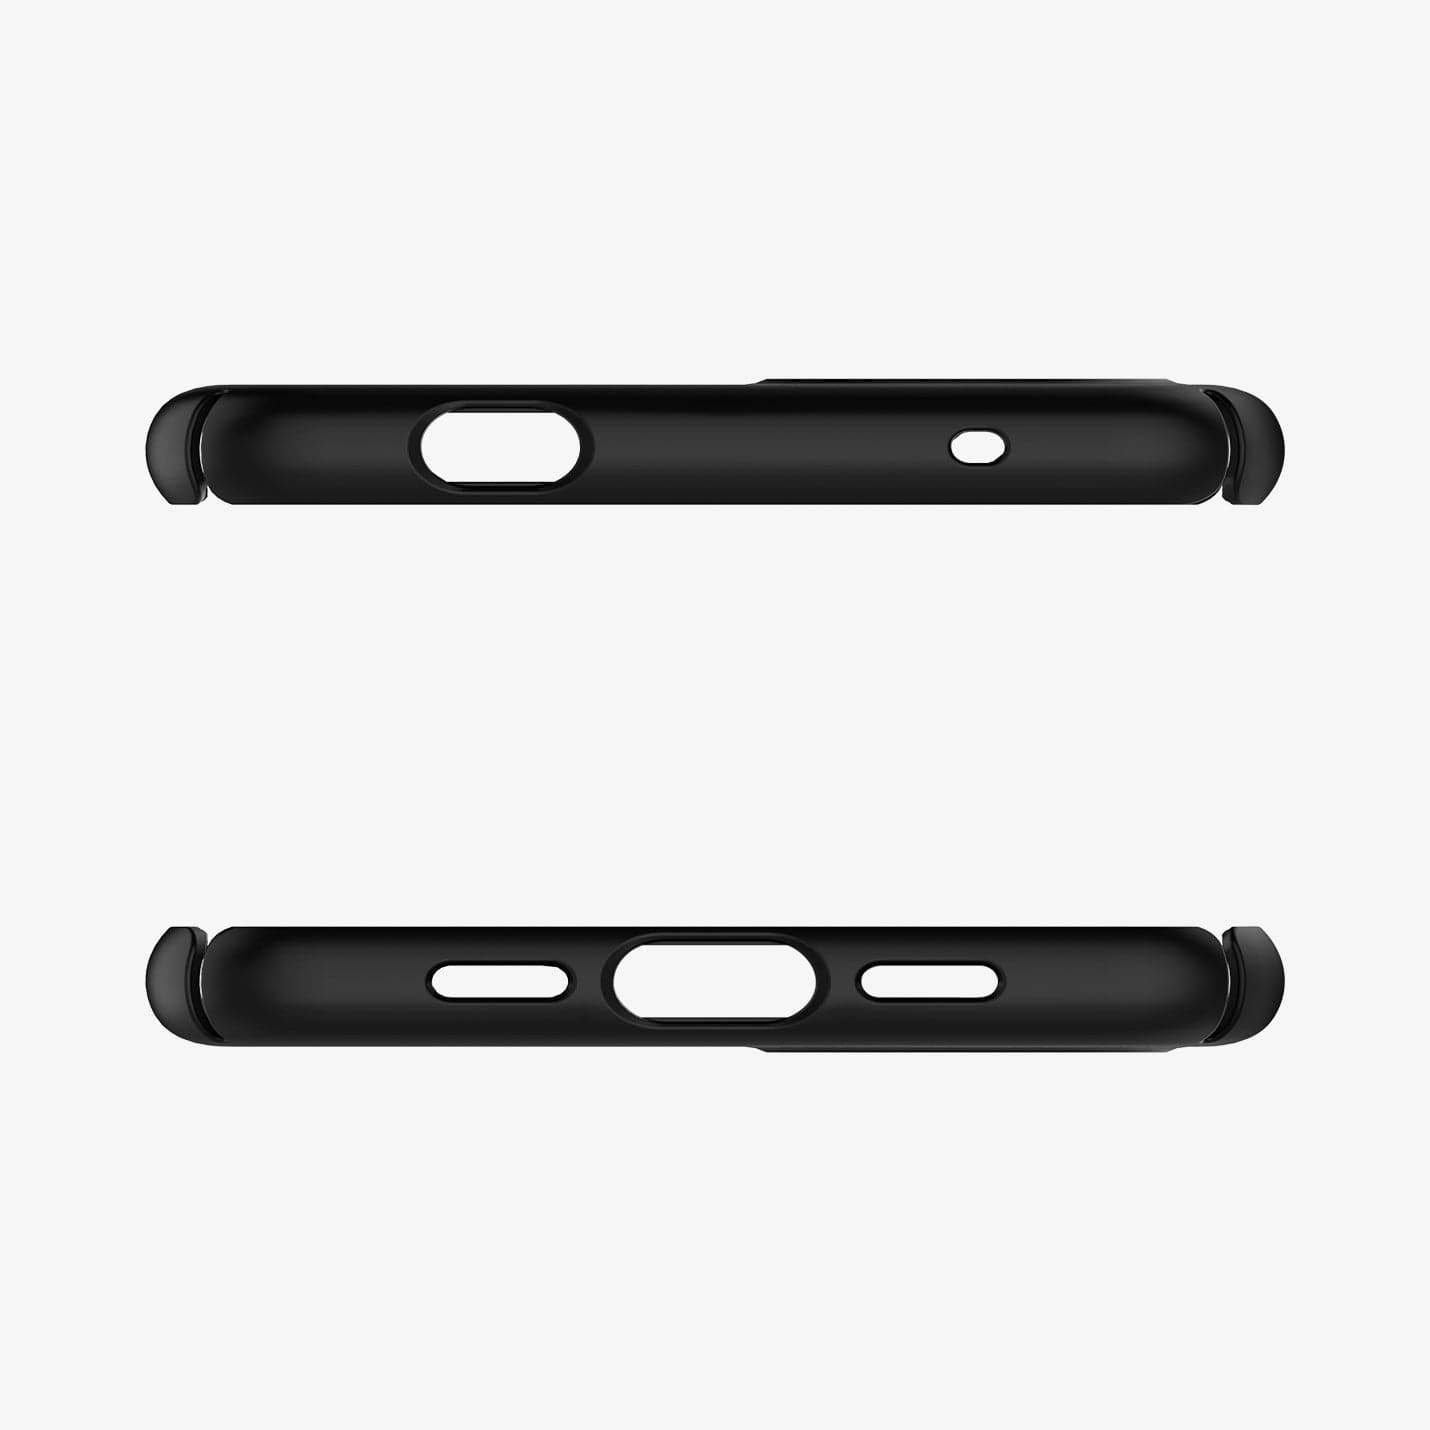 F23CS26483 - Pixel 3a Case Thin Fit in black showing the top and bottom with precise cutouts